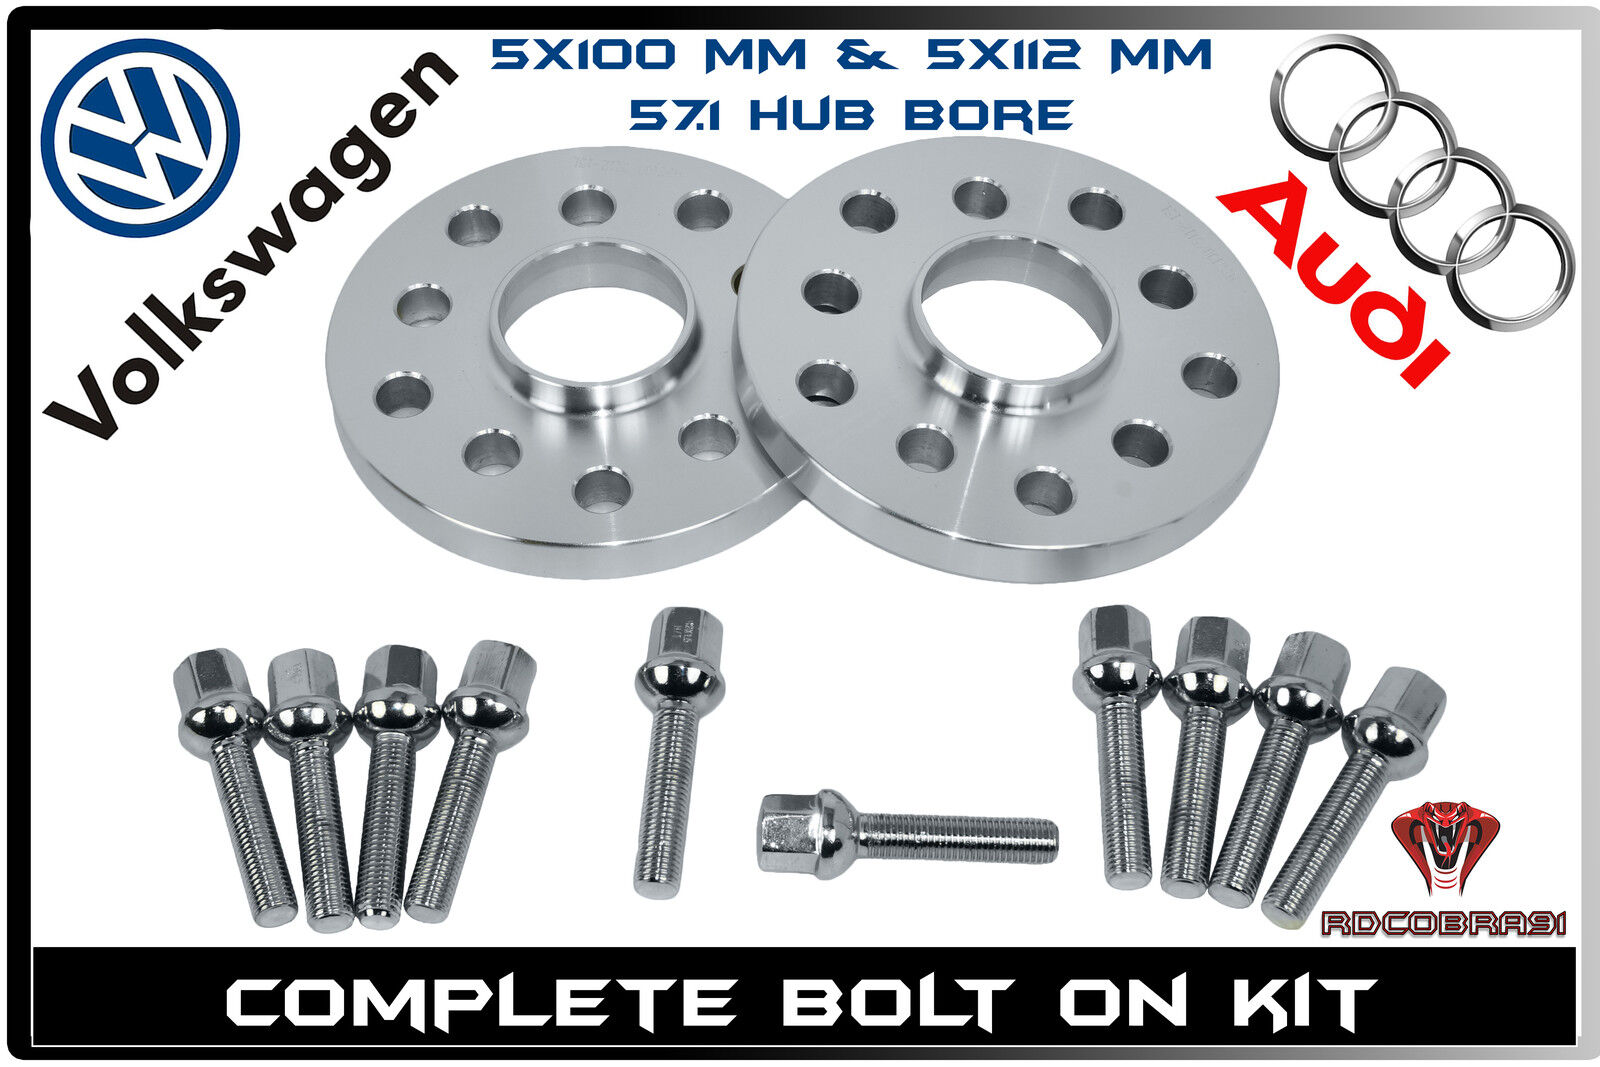 2 Pc 20mm Wheel Spacers 5x100 5x112 | + 10 Lug Bolts | Fits Audi & Volkswagen